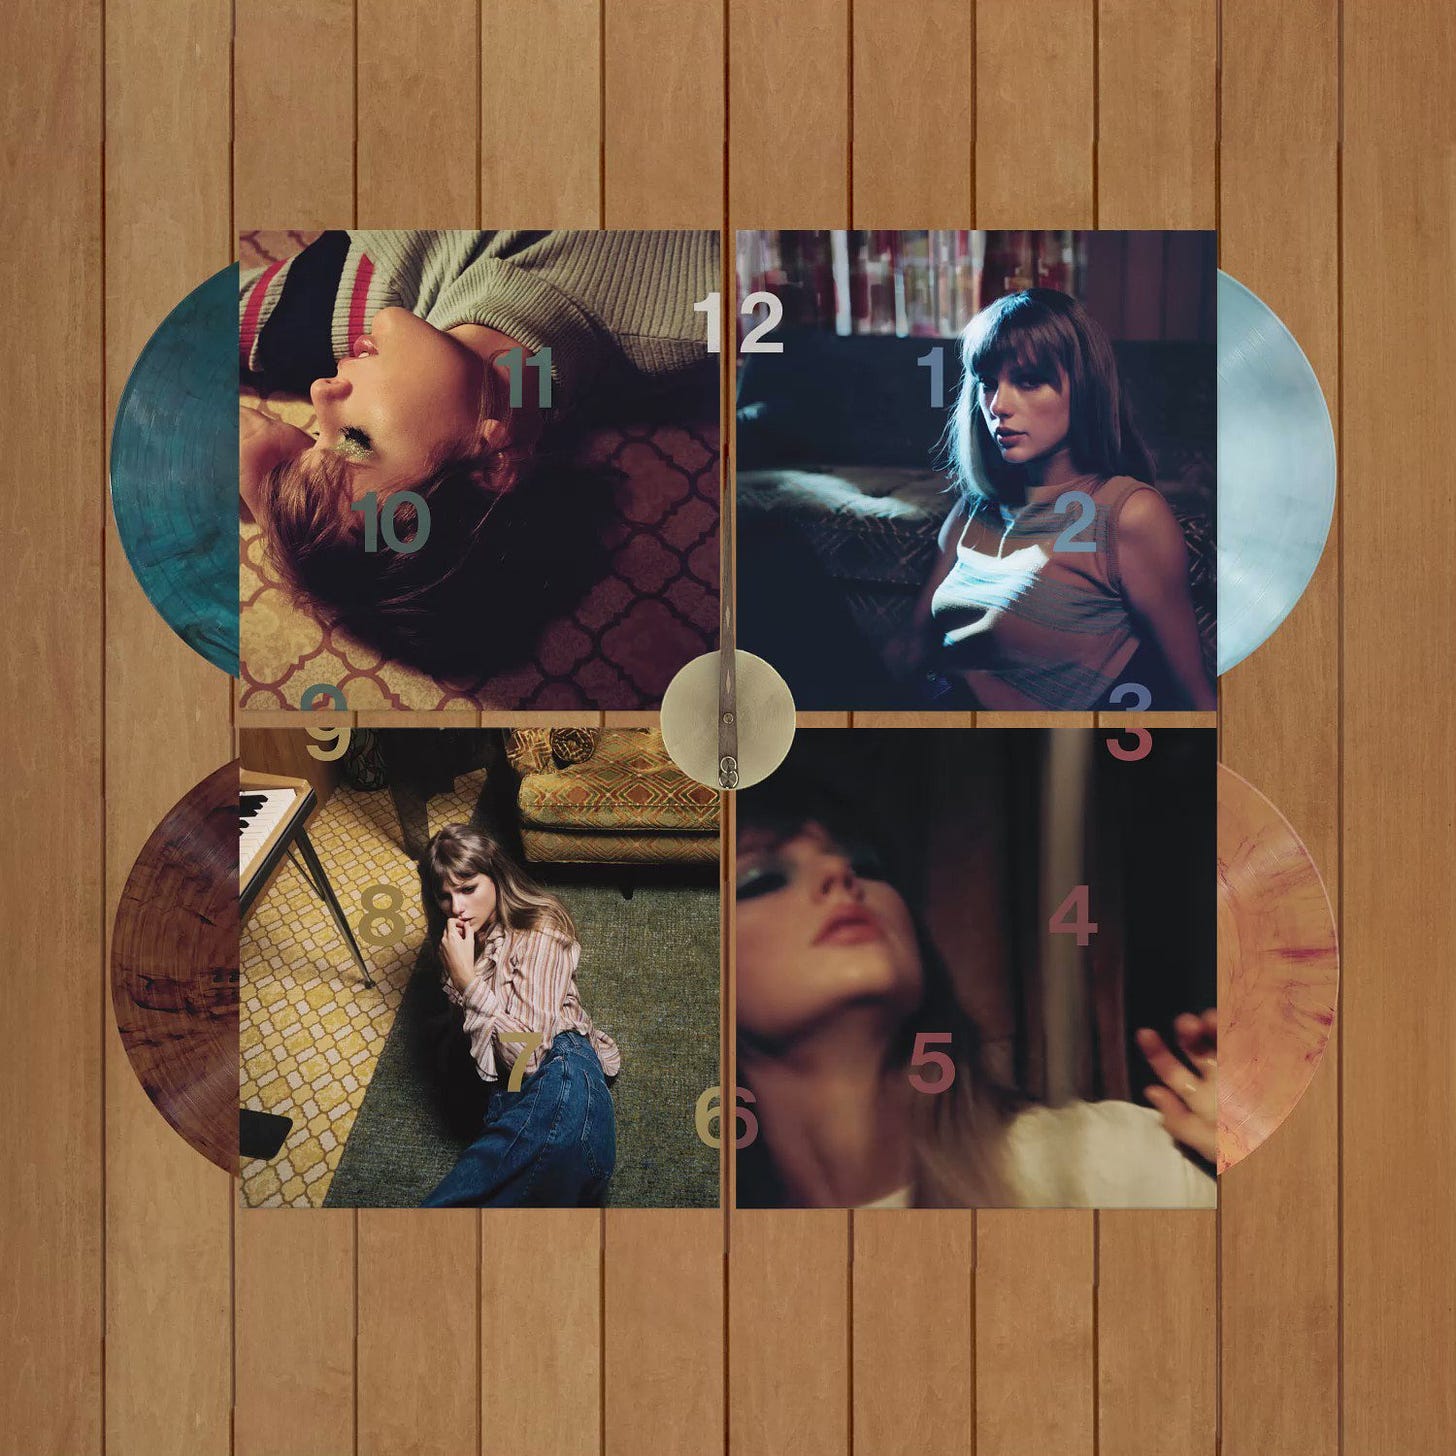 Taylor Nation on Twitter: "Never miss another midnight again. 🤭 The  special edition #TSmidnighTS vinyl are back AND they can help you tell  time. 🕰 #ItsAClock Collect all vinyl, CDs, and clock